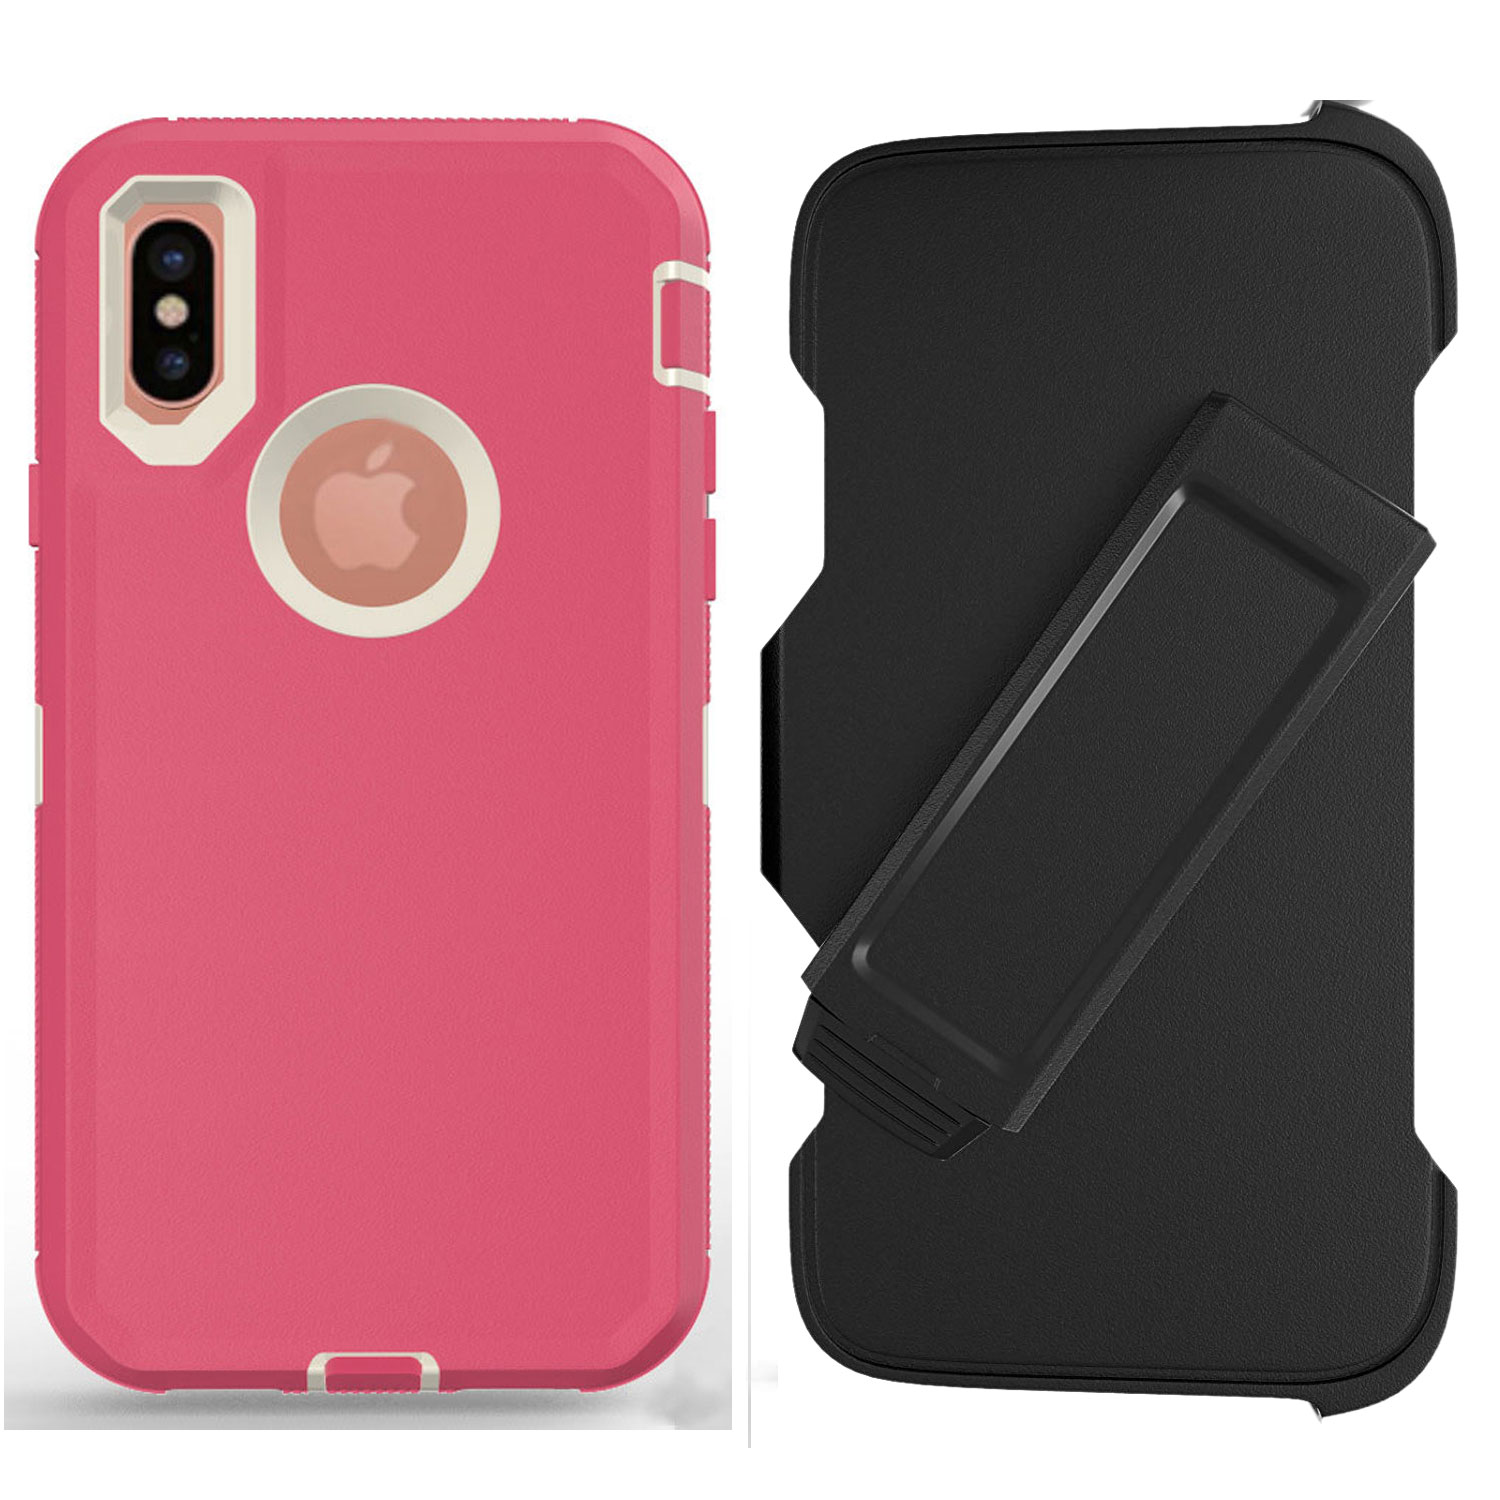 iPHONE Xs Max Armor Robot Case with Clip (Hot Pink White)